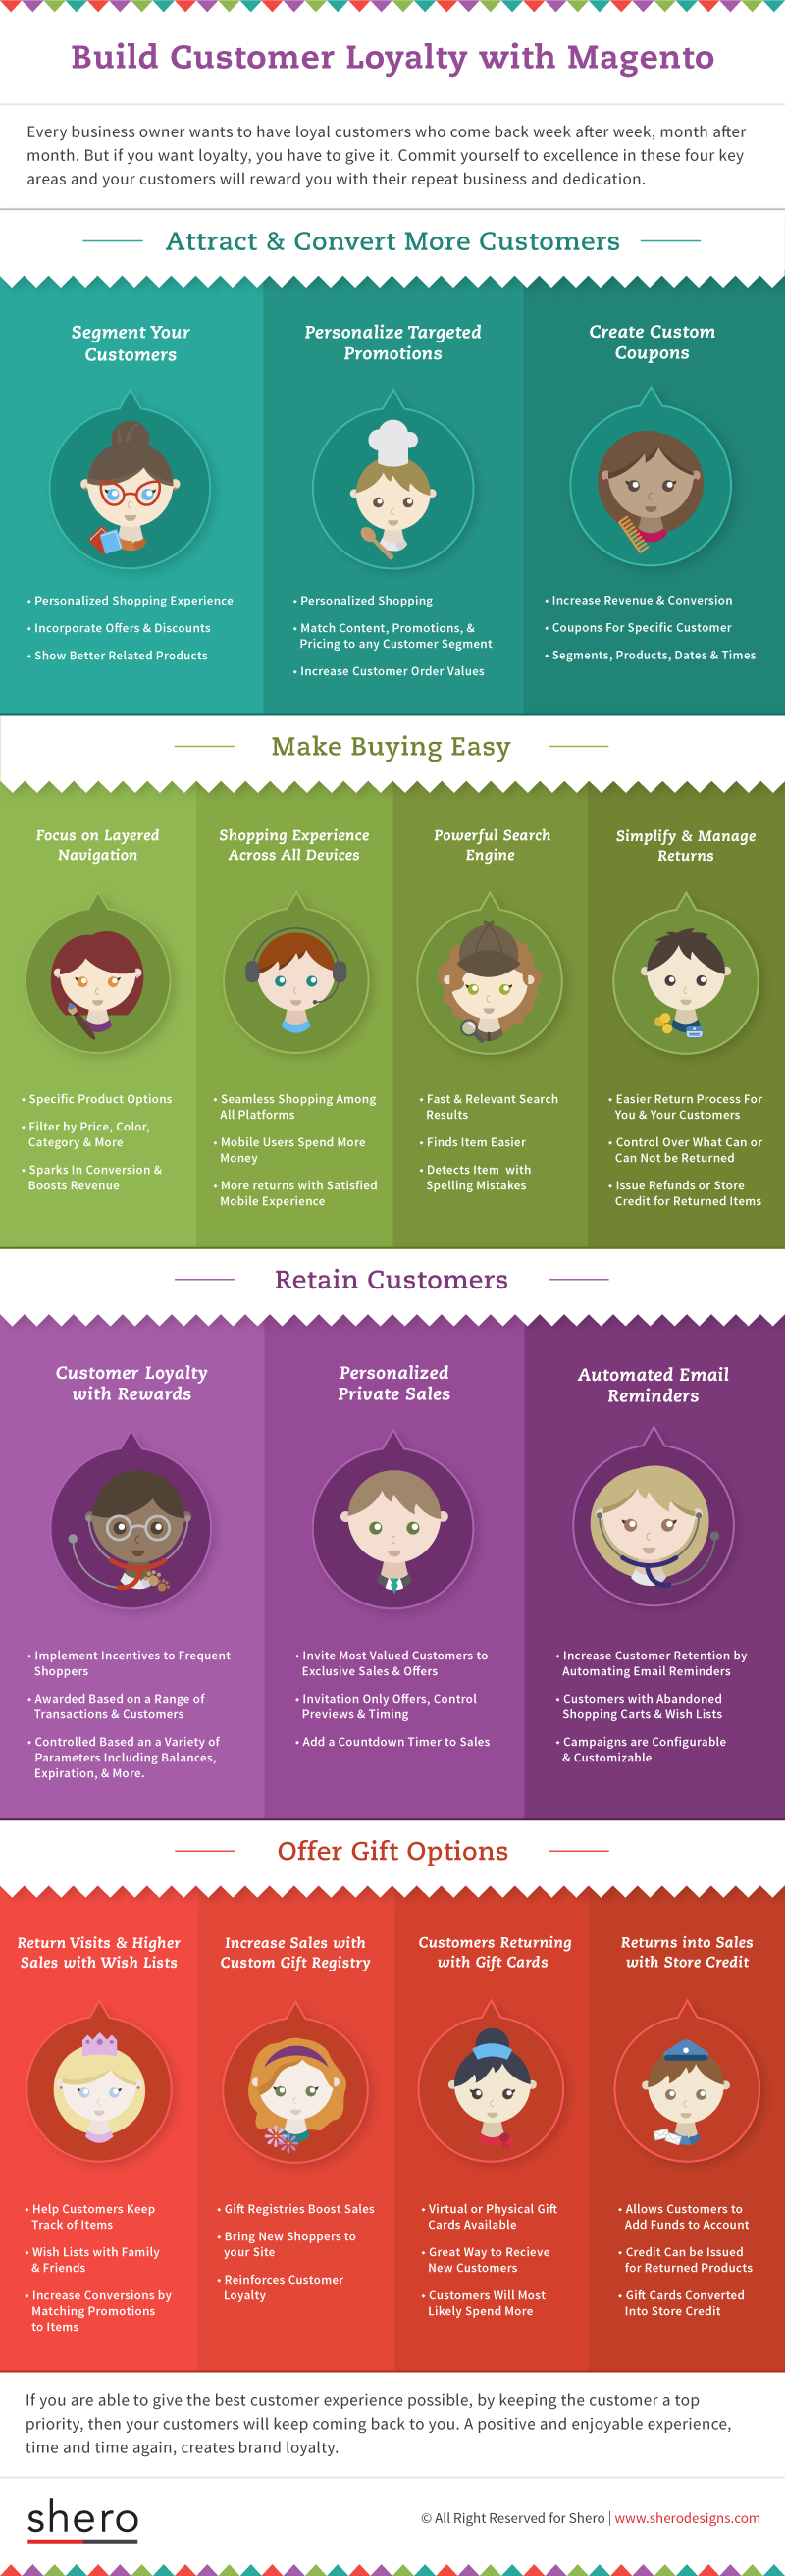 Infographic: Building Customer Loyalty for Online Stores